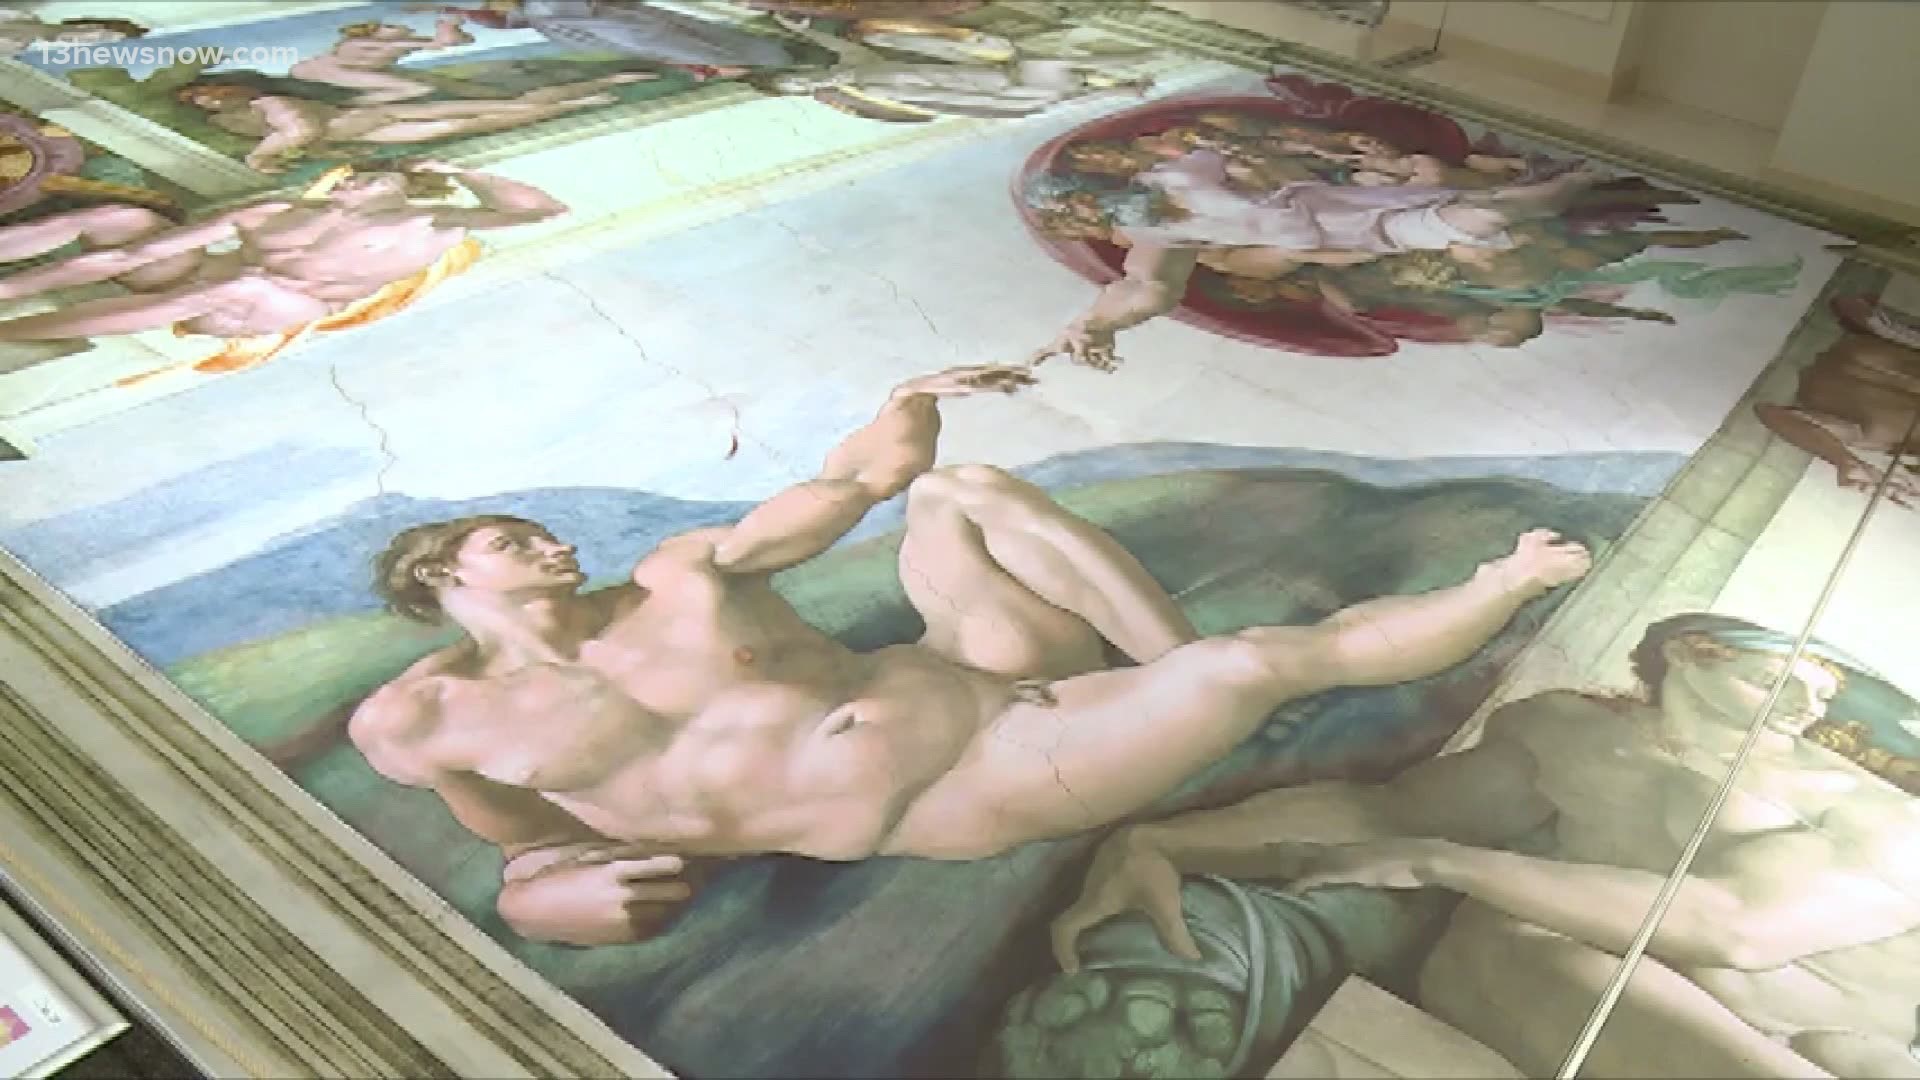 The Virginia Arts Festival and MacArthur Center are involved in a lawsuit surrounding the Michelangelo exhibit, which may be operating illegally after an art heist.